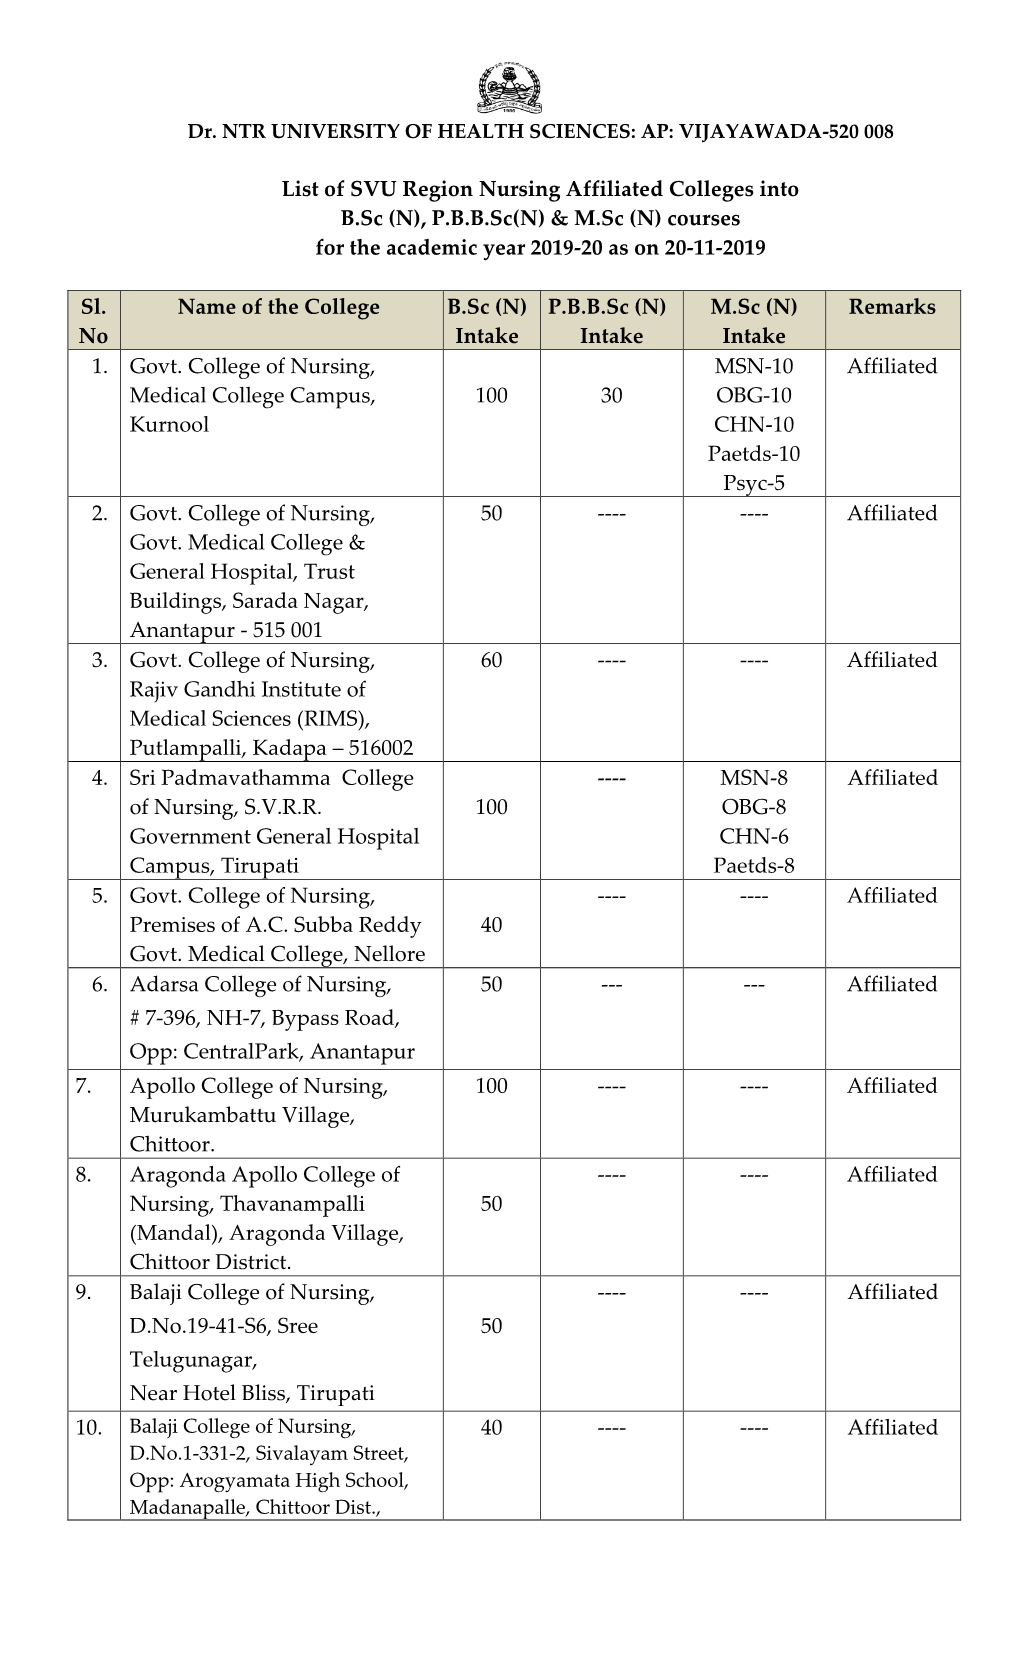 List of SVU Region Nursing Affiliated Colleges Into B.Sc (N), P.B.B.Sc(N) & M.Sc (N) Courses for the Academic Year 2019-20 As on 20-11-2019